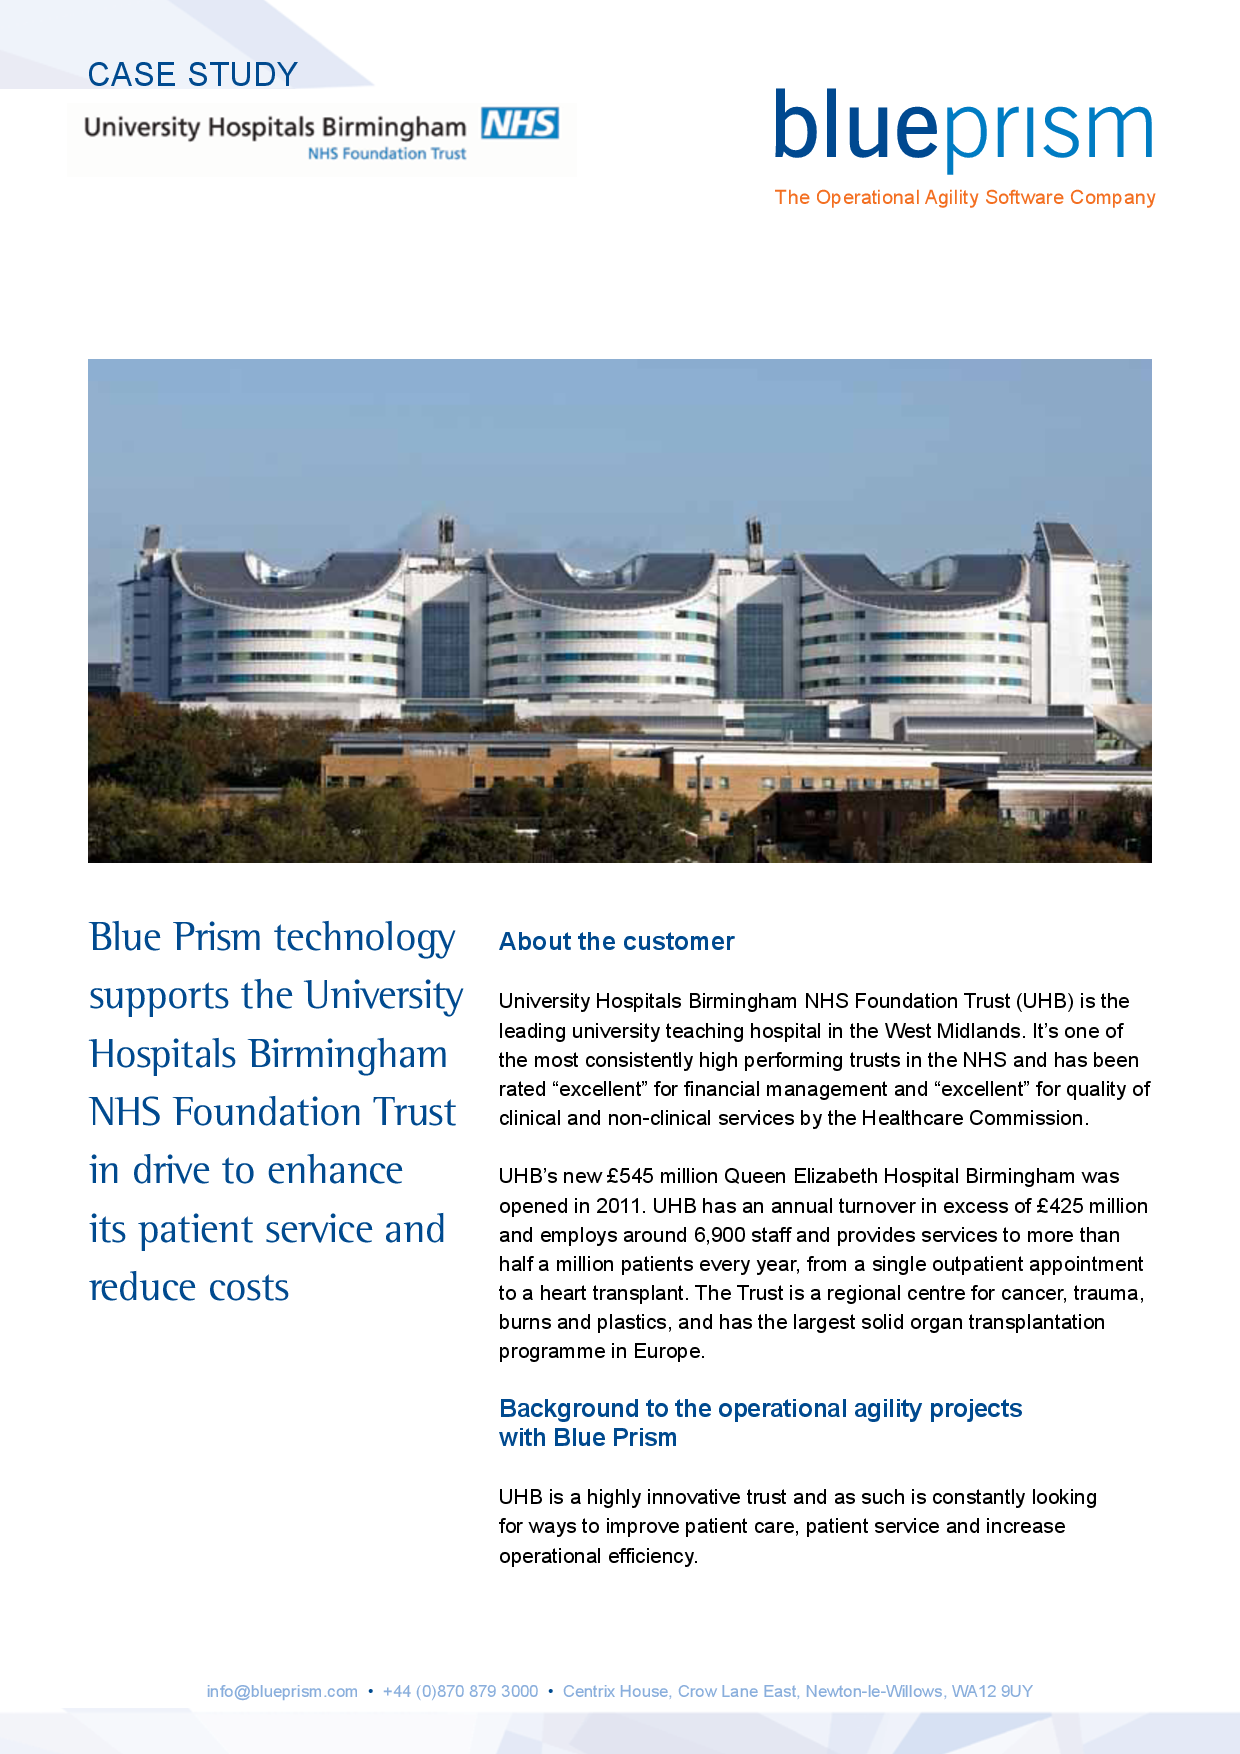 Blue Prism Technology Supports the University Hospitals Birm